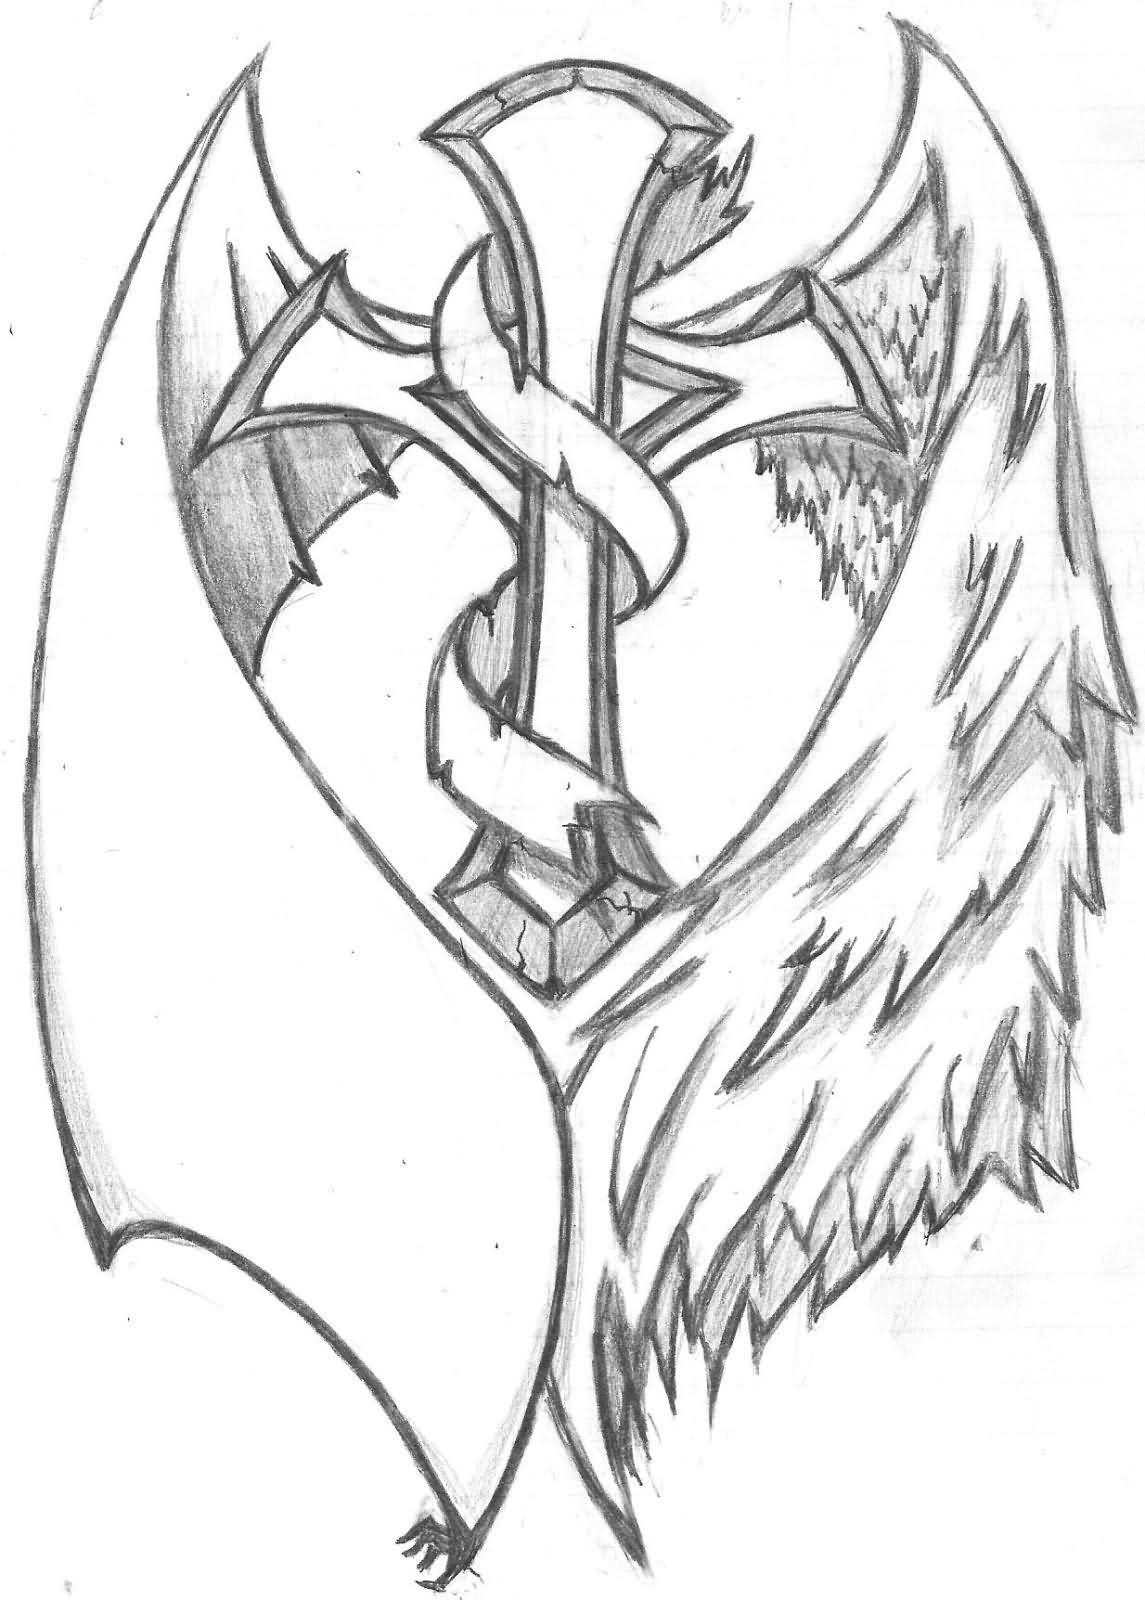 Black And Grey Cross With Wings Tattoo Design Streadwelljr with regard to size 1145 X 1600